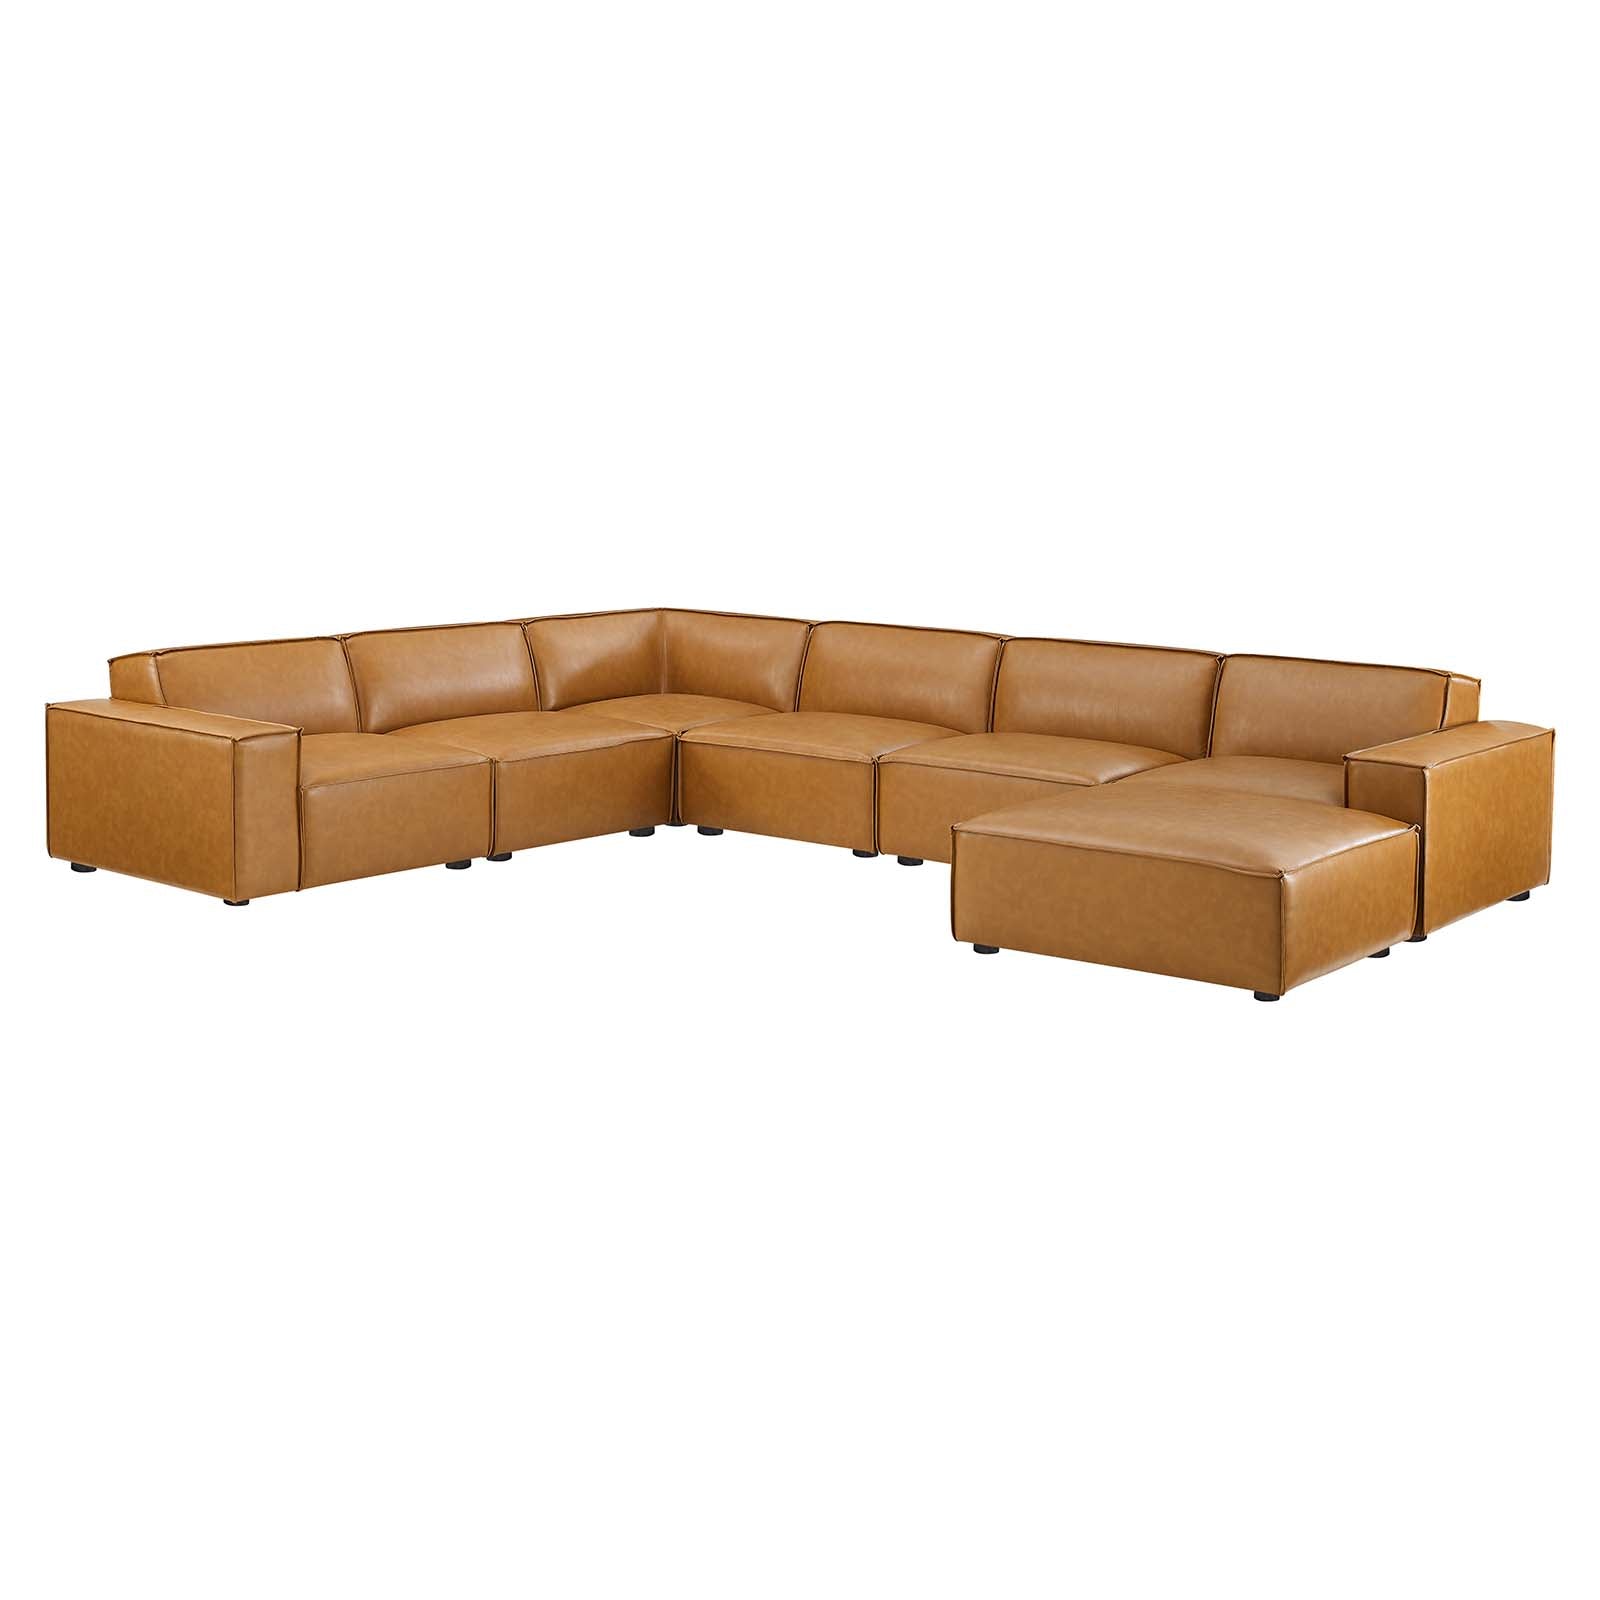 Restore 7-Piece Vegan Leather Sectional Sofa - East Shore Modern Home Furnishings